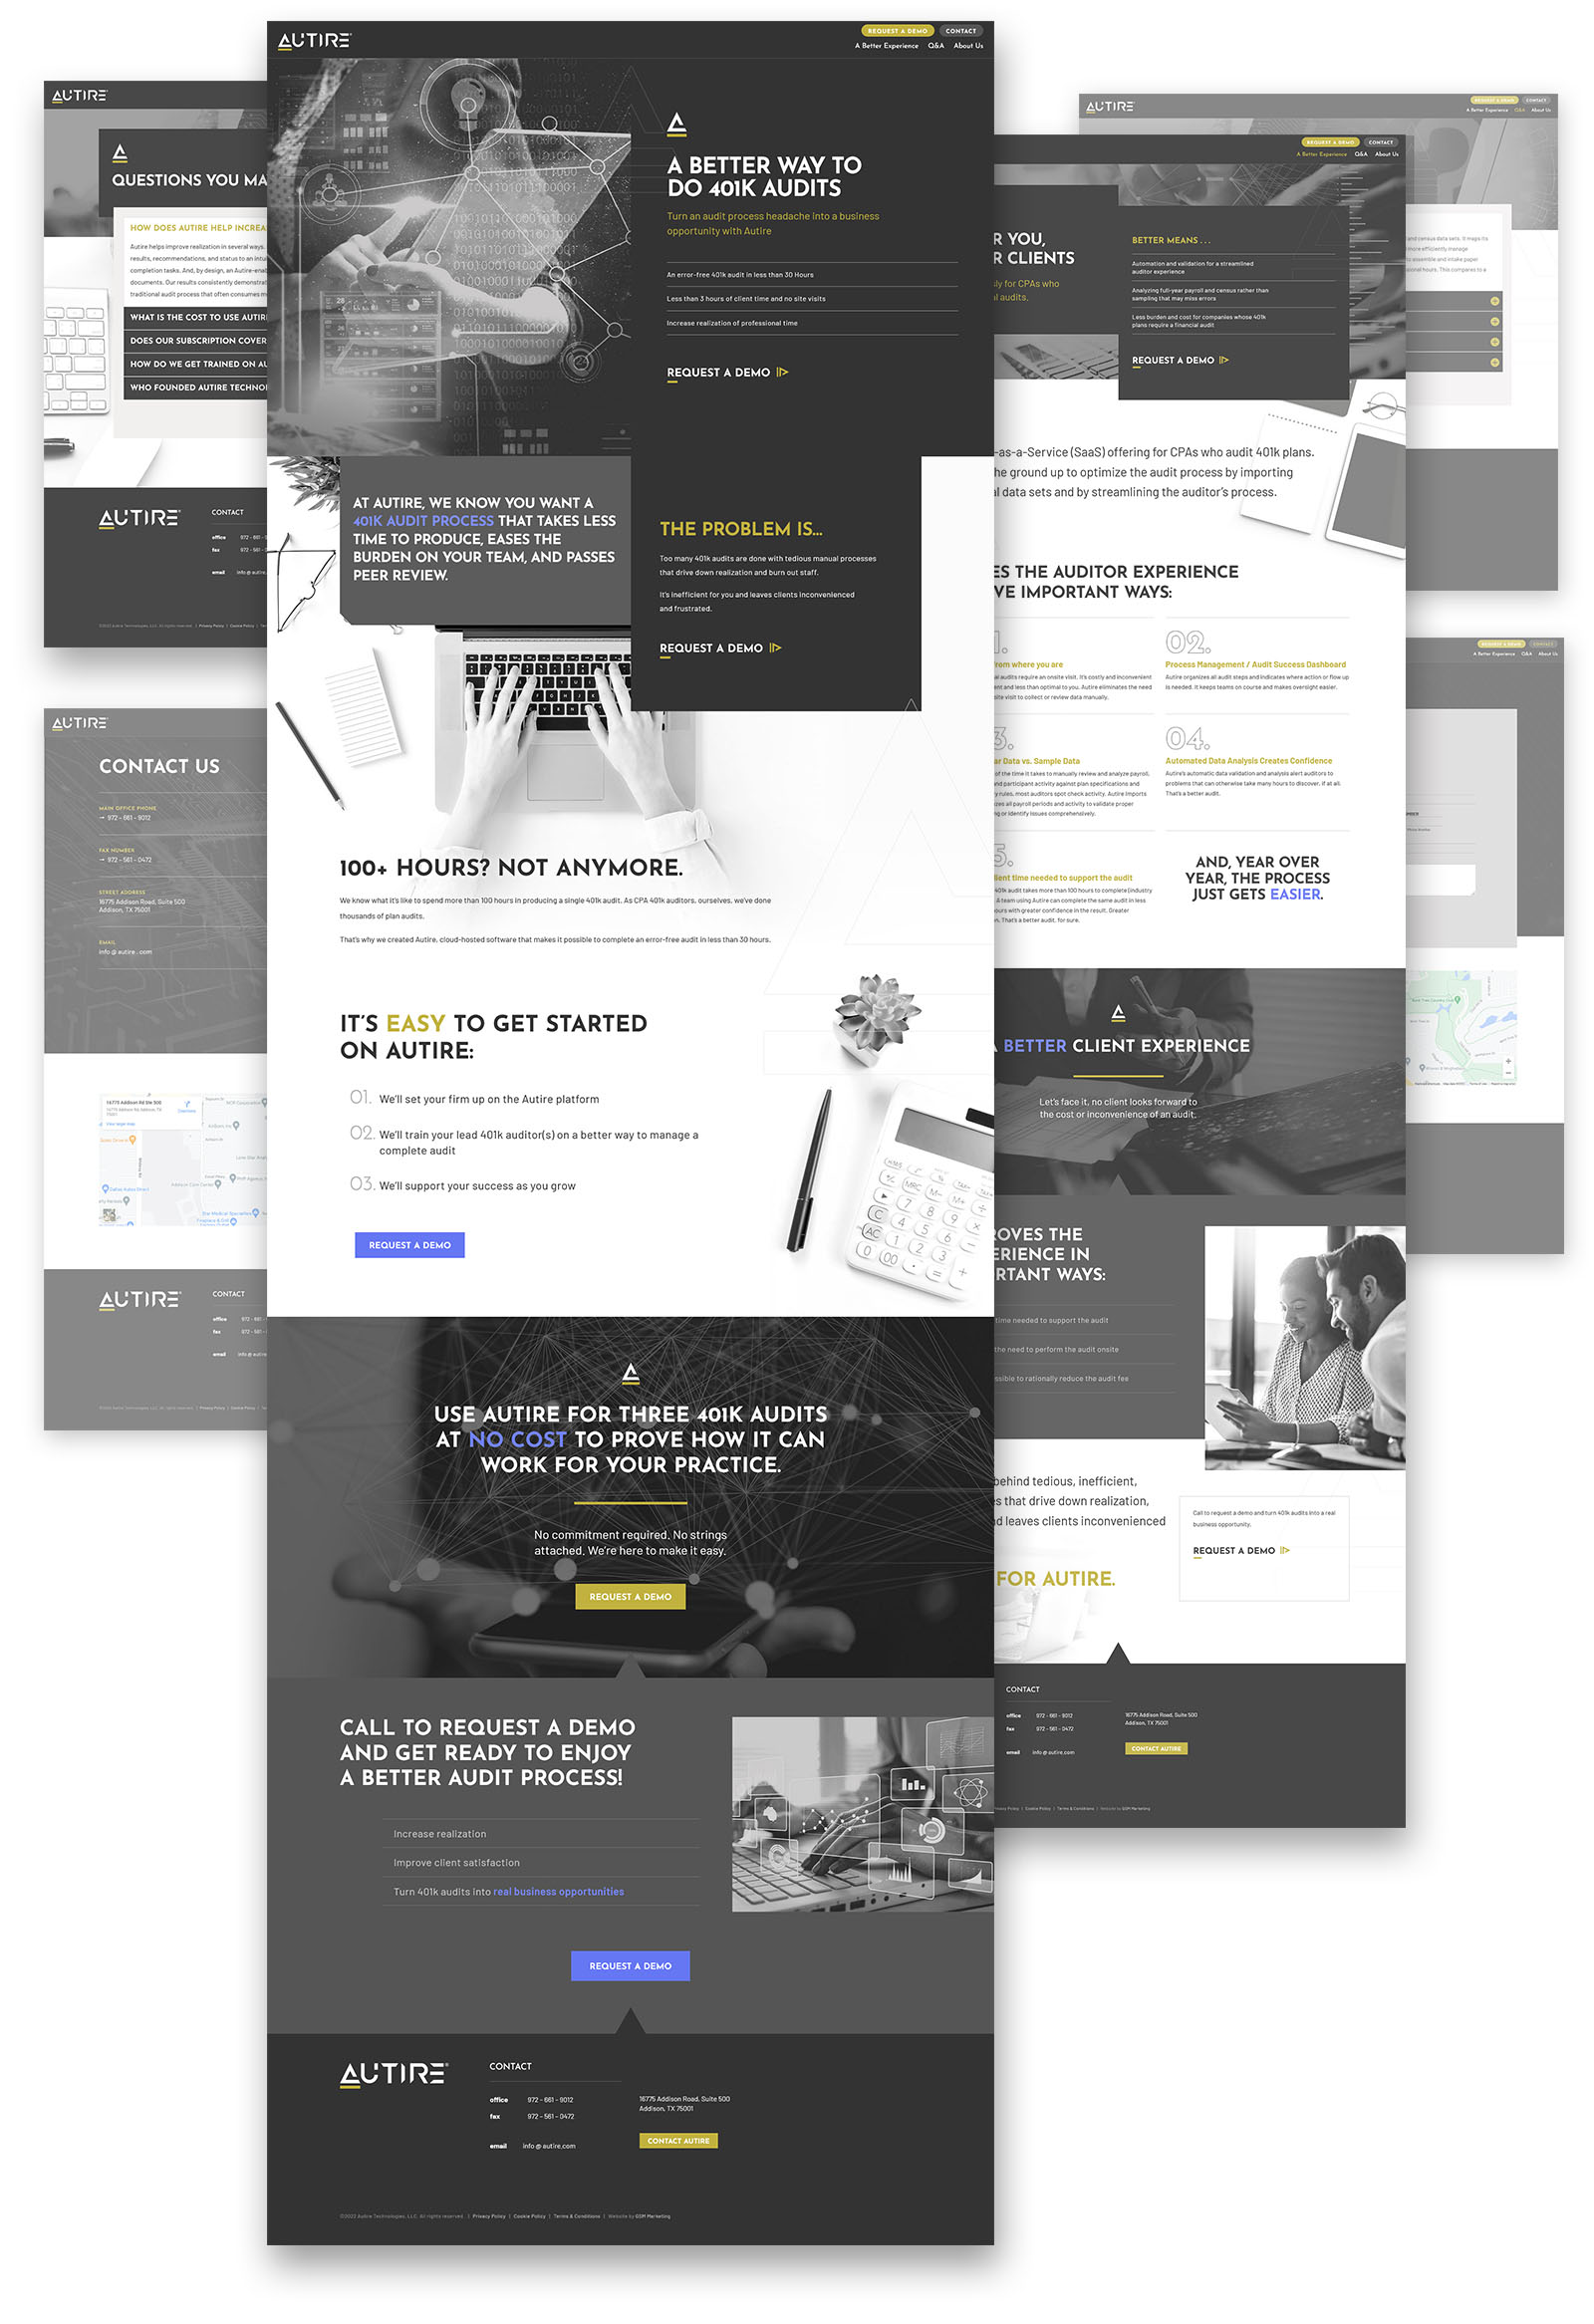 Flat composition displaying full webpage designs